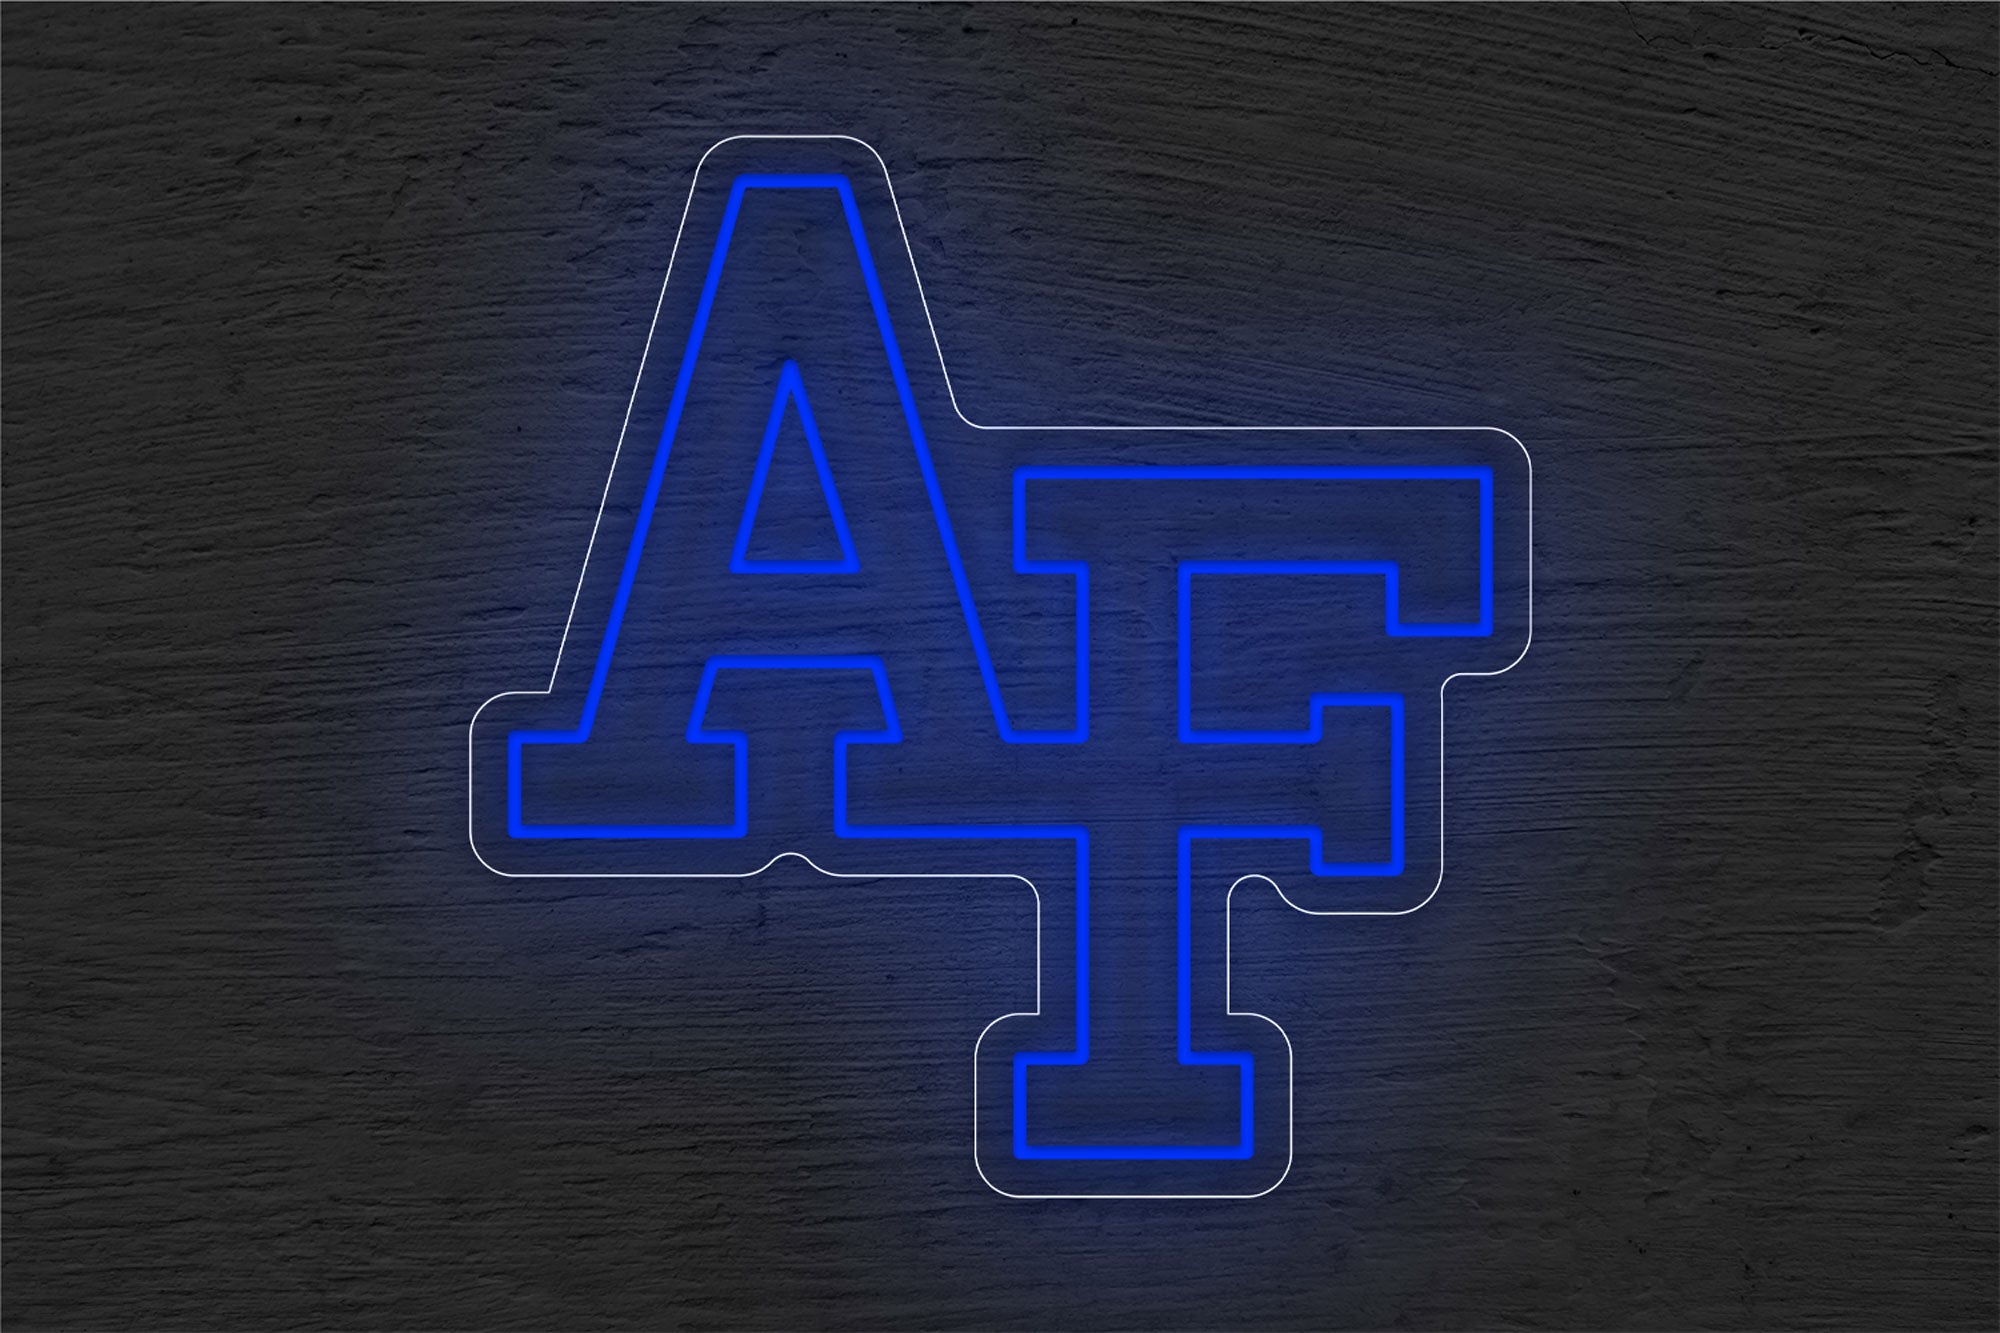 Air Force Falcons Men's Basketball LED Neon Sign